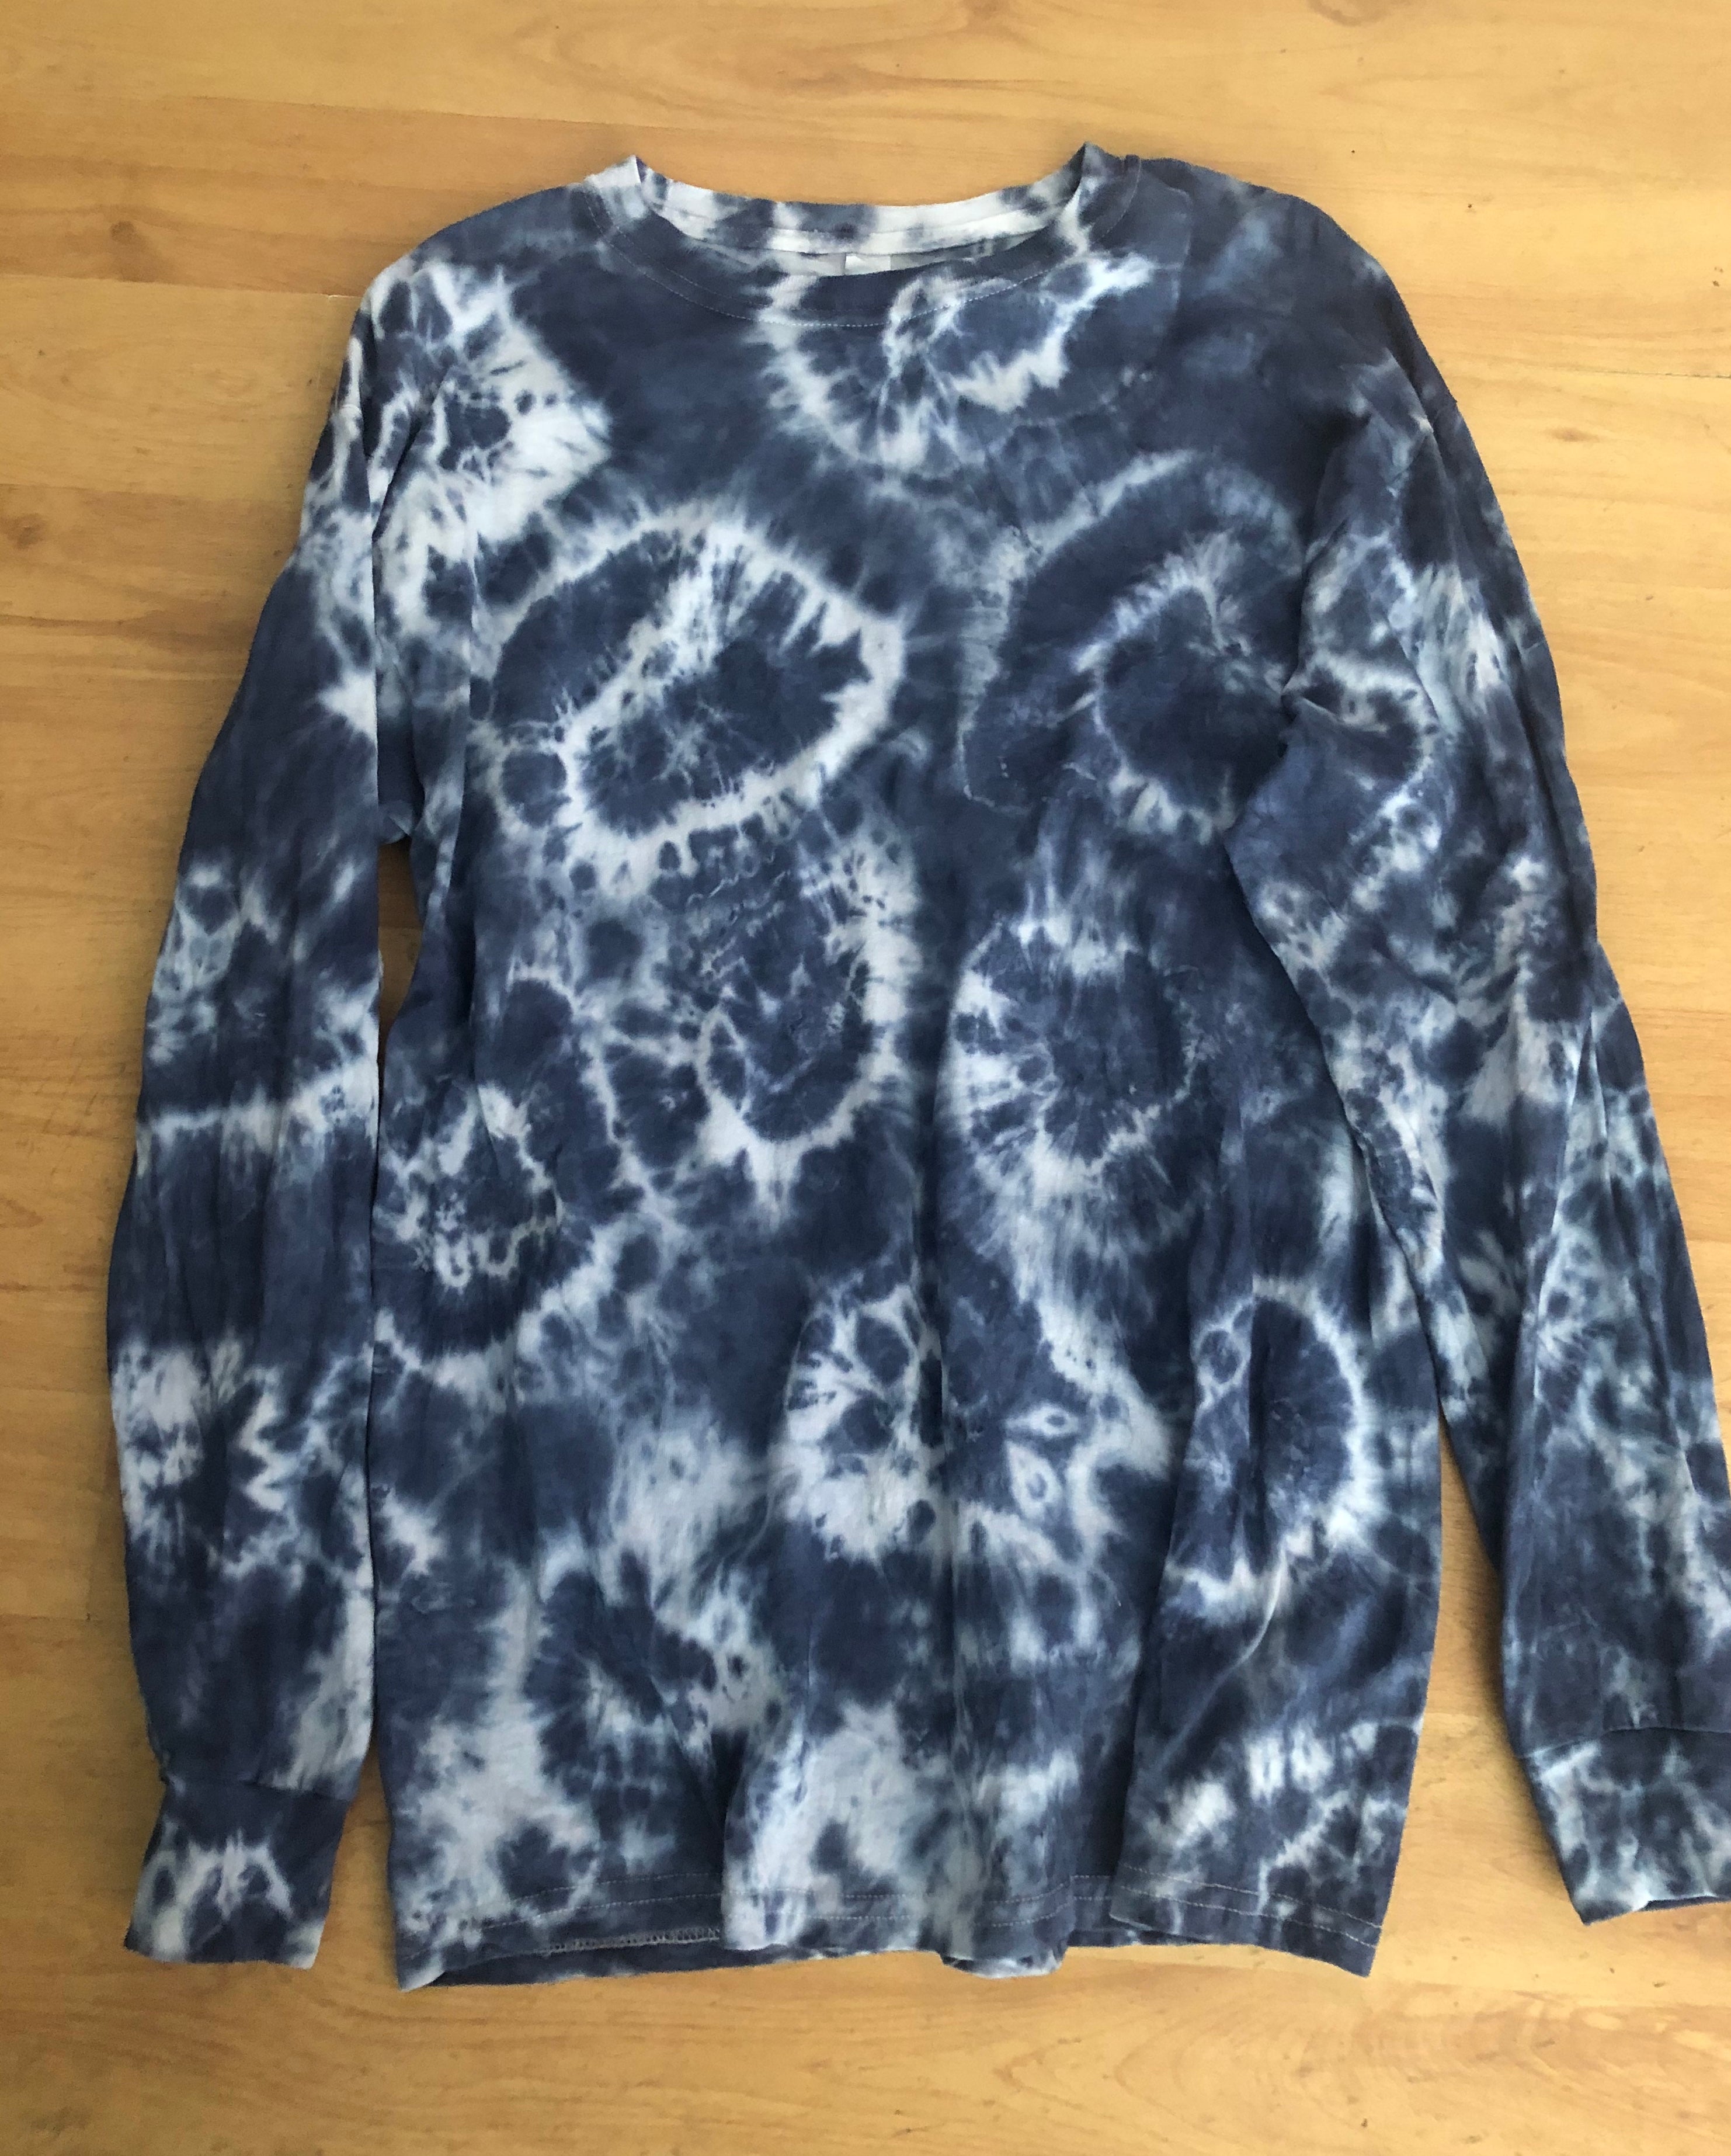 Unisex Hand Painted Tie Dyed Long Sleeve T Shirt